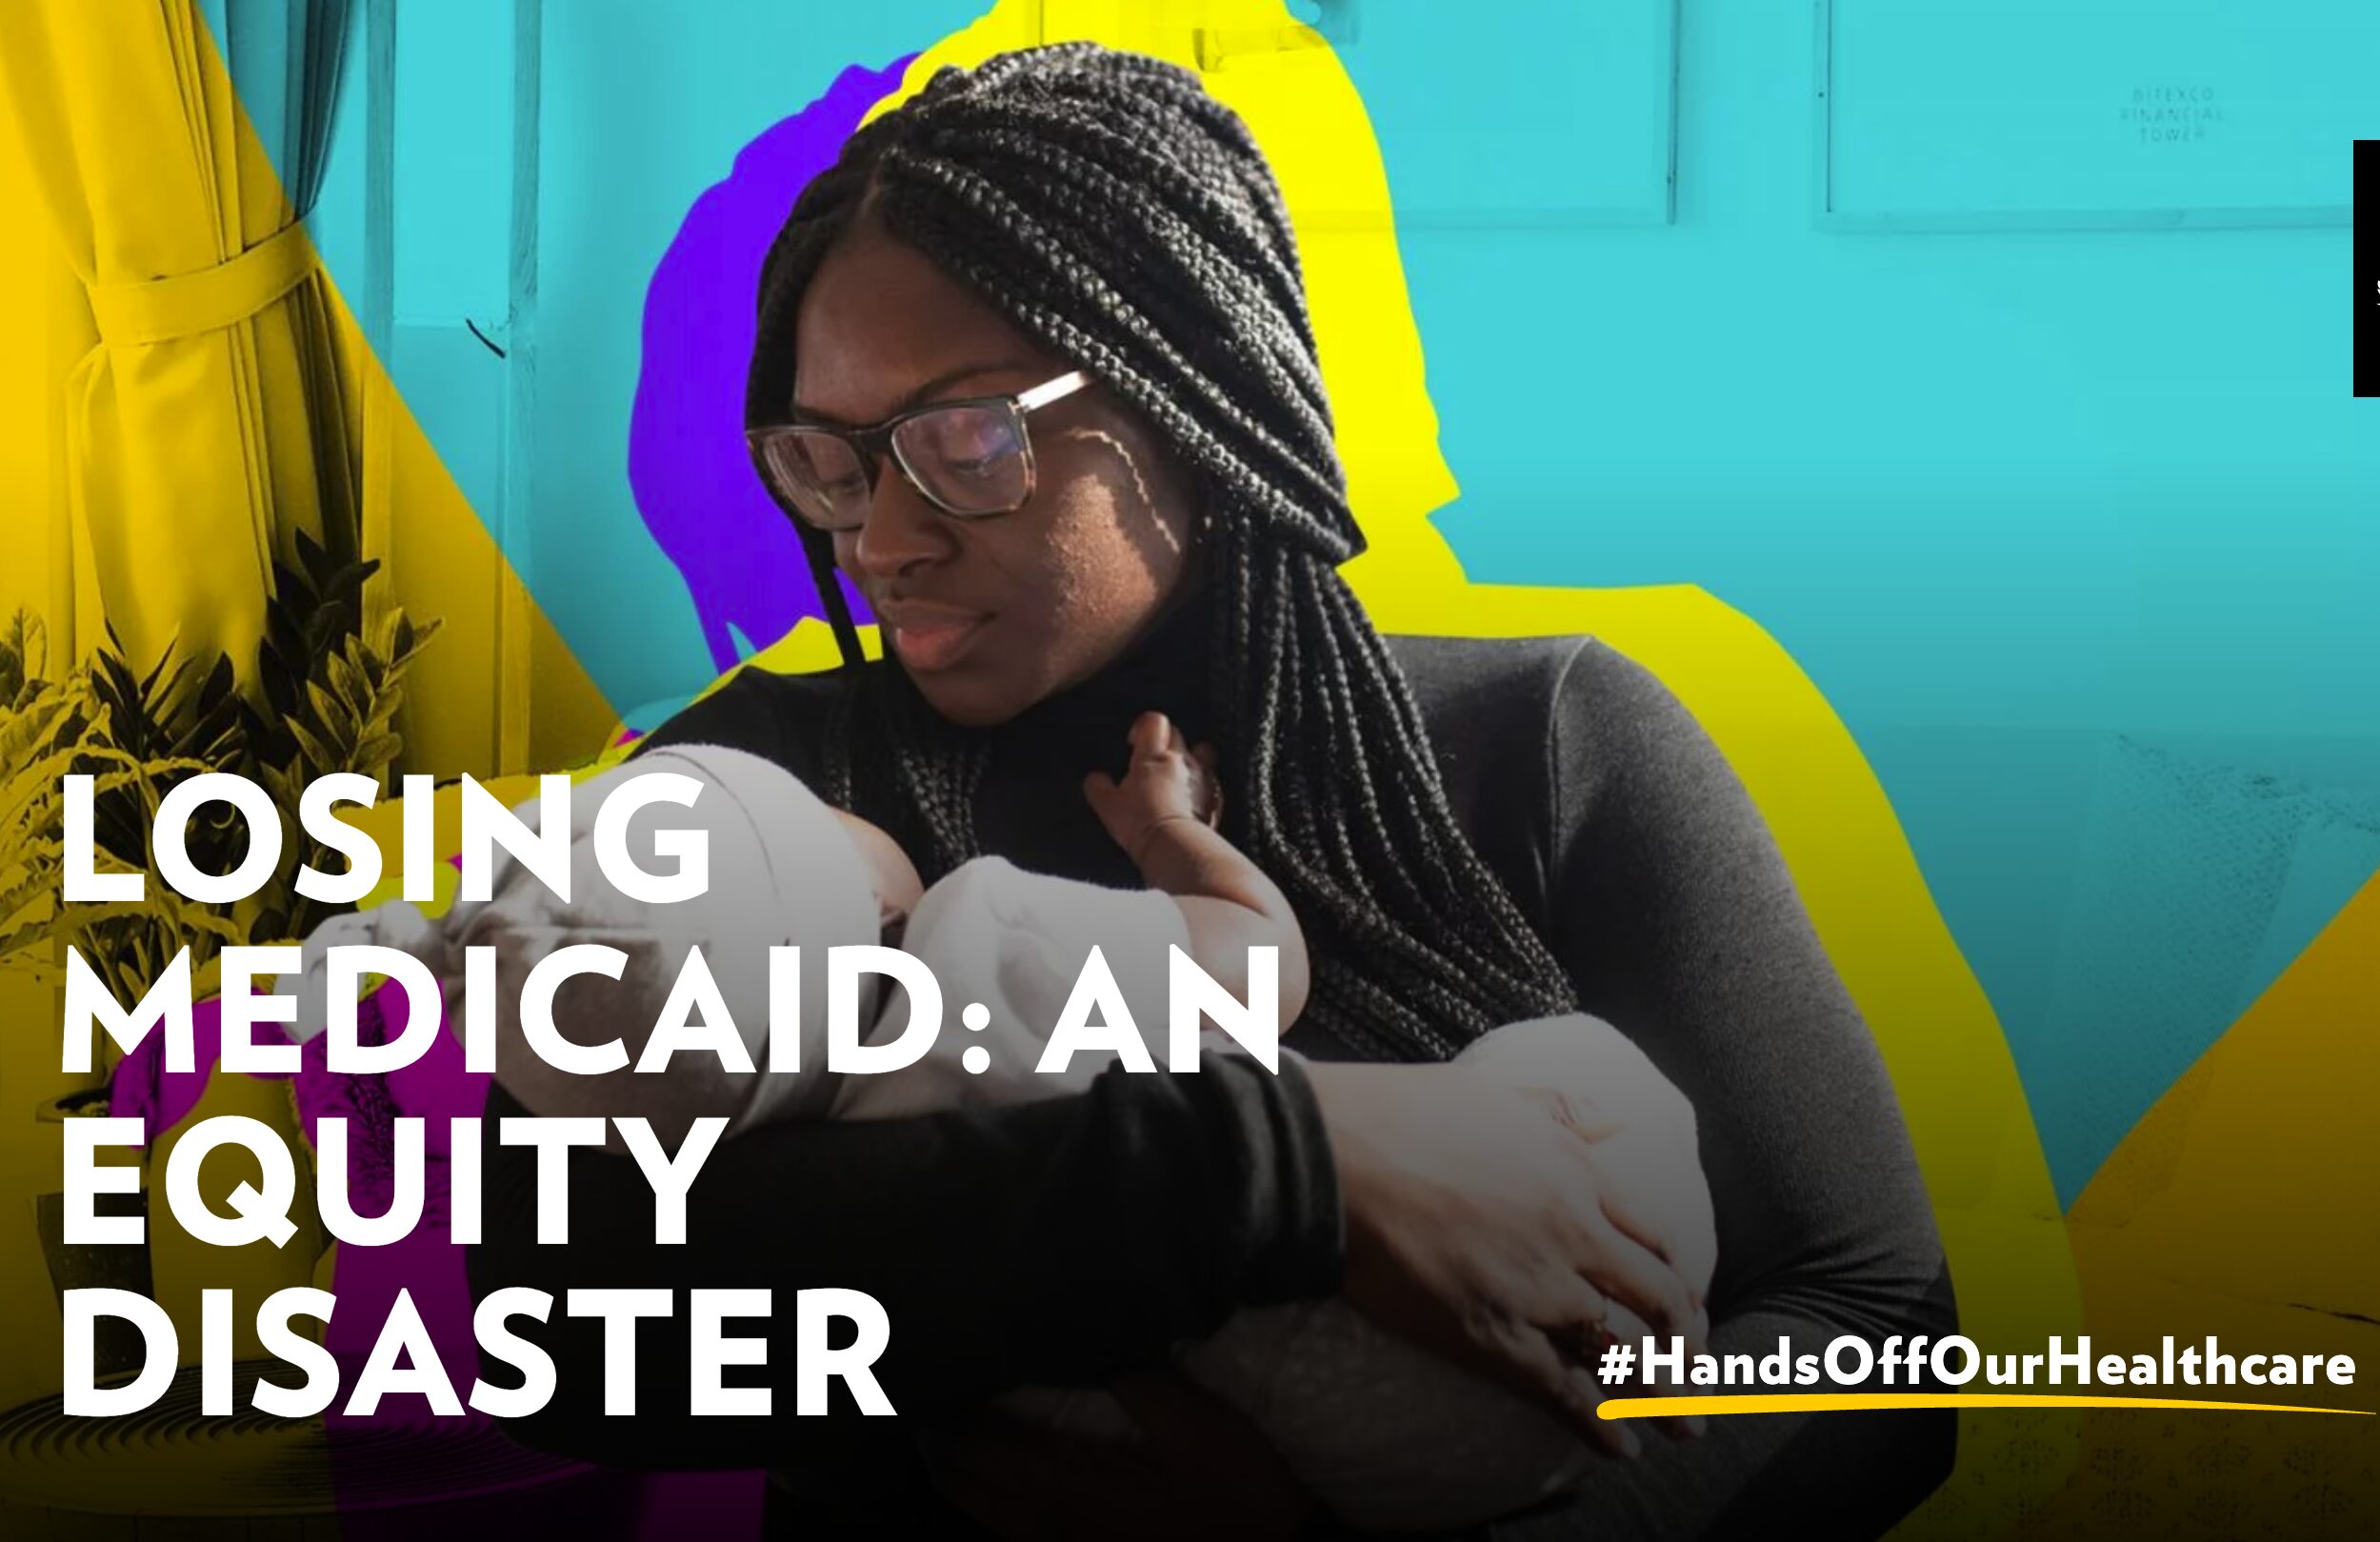 An illustration of a mother and child with the caption "Losing Medicaid: An Equity Disaster."